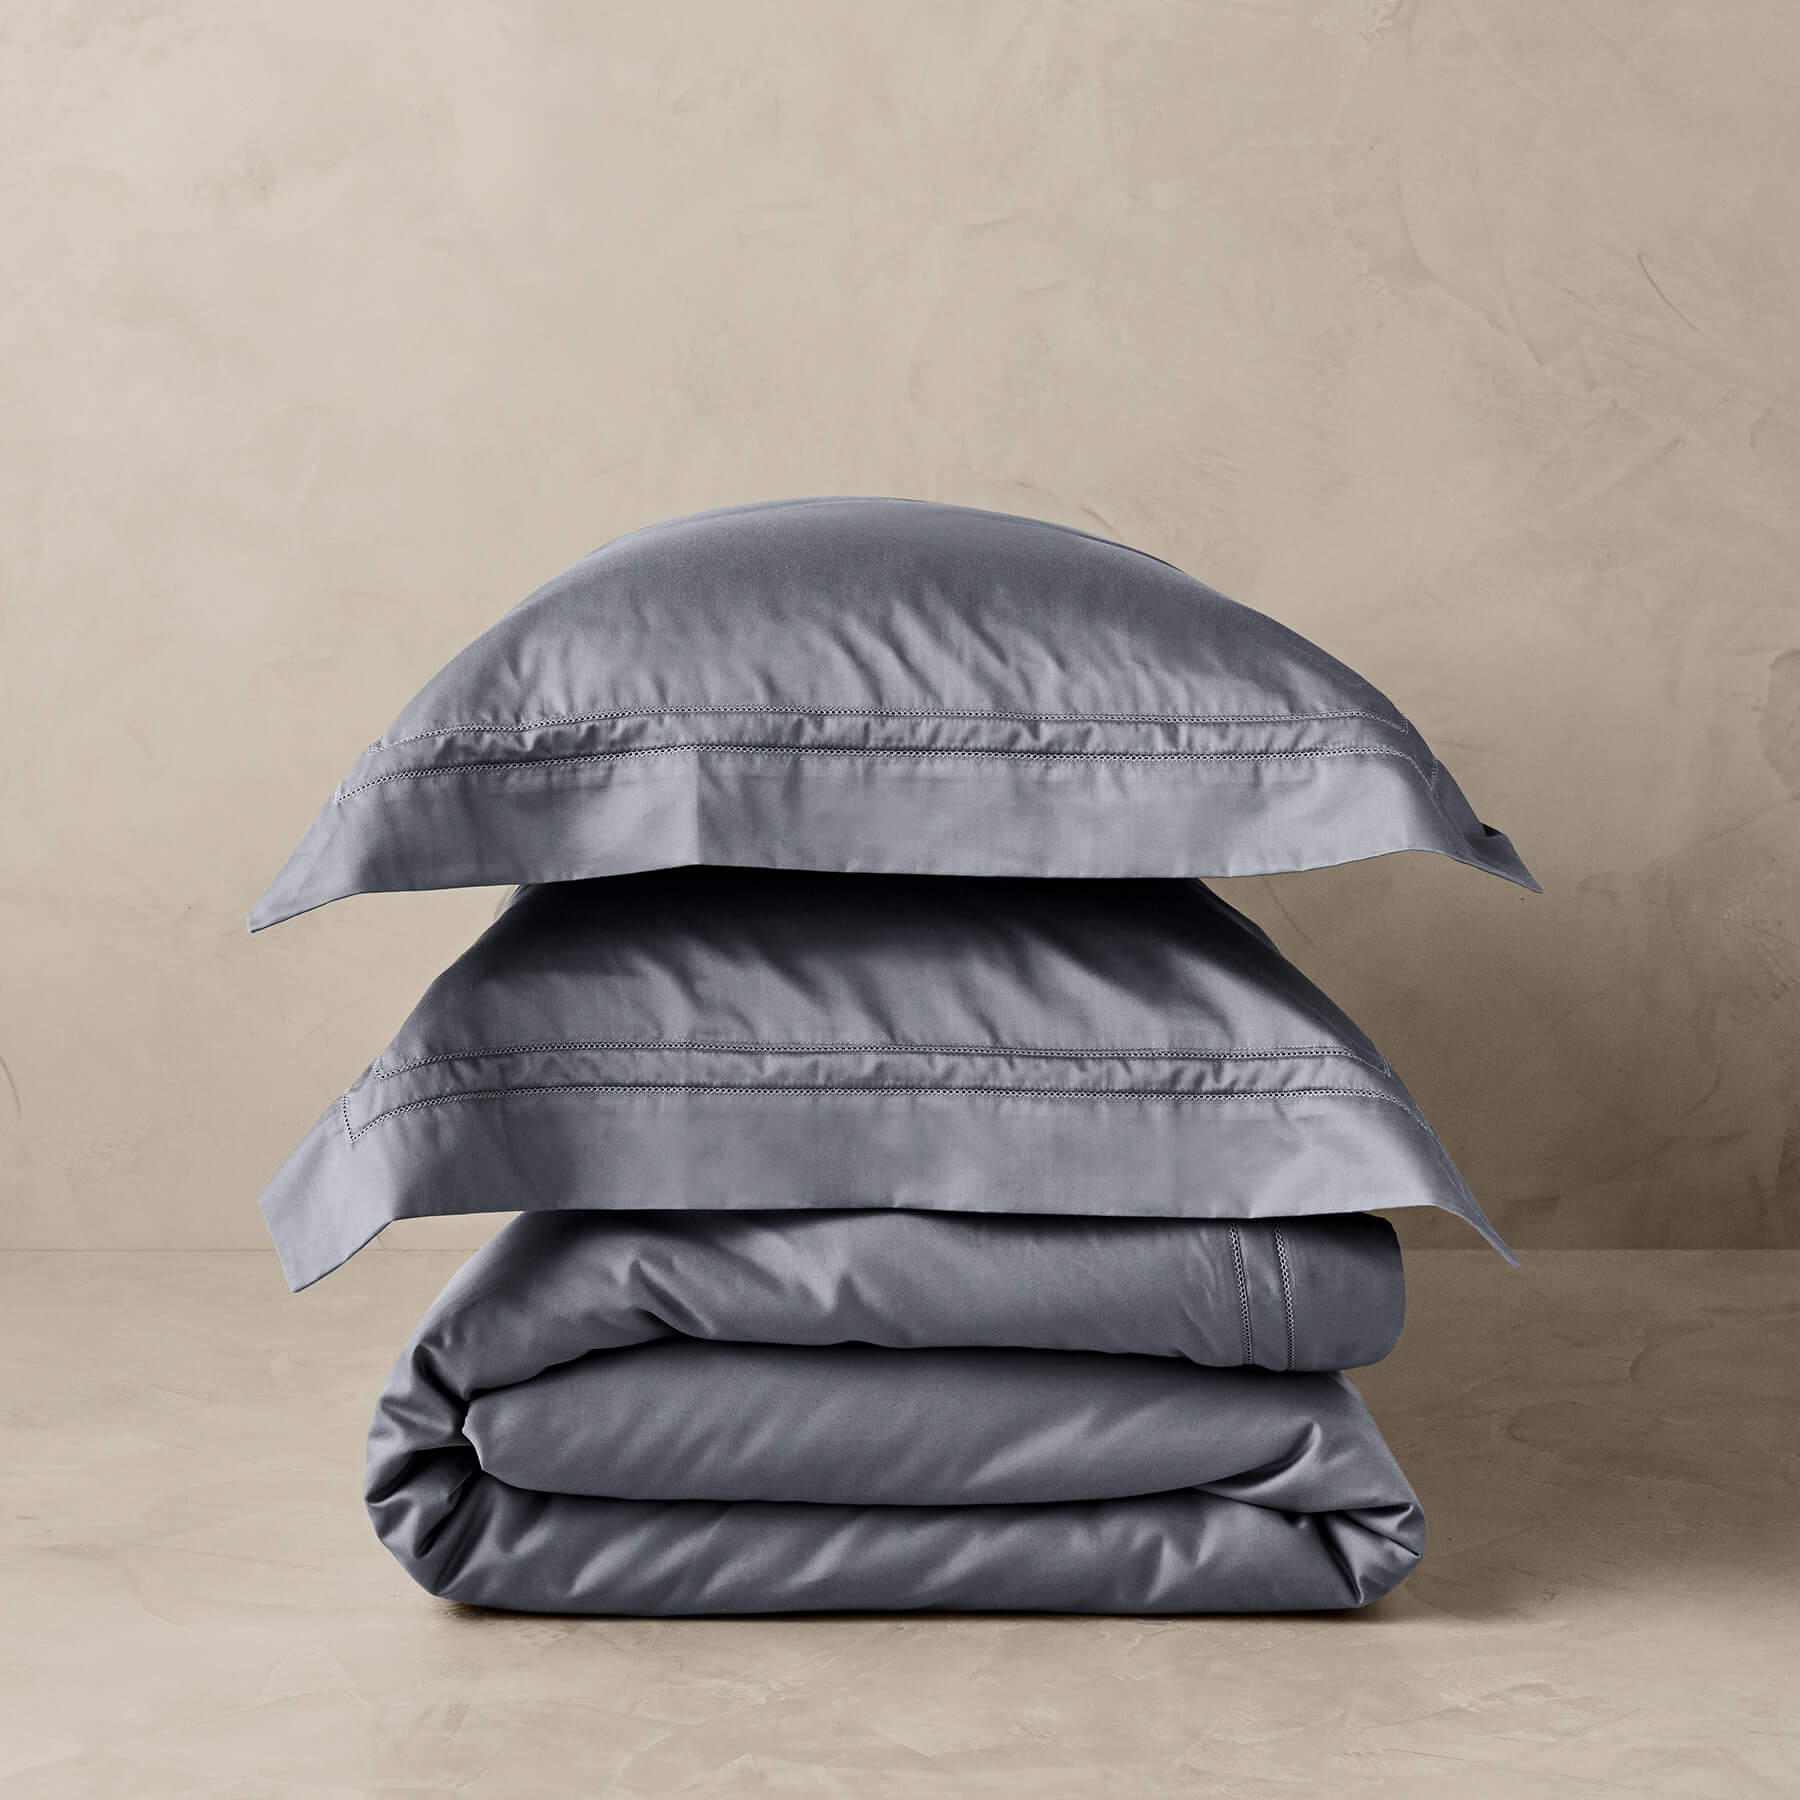 Kings & Queens Egyptian Cotton Classic Hemstitch Duvet Cover Set in Slate Bedding Set